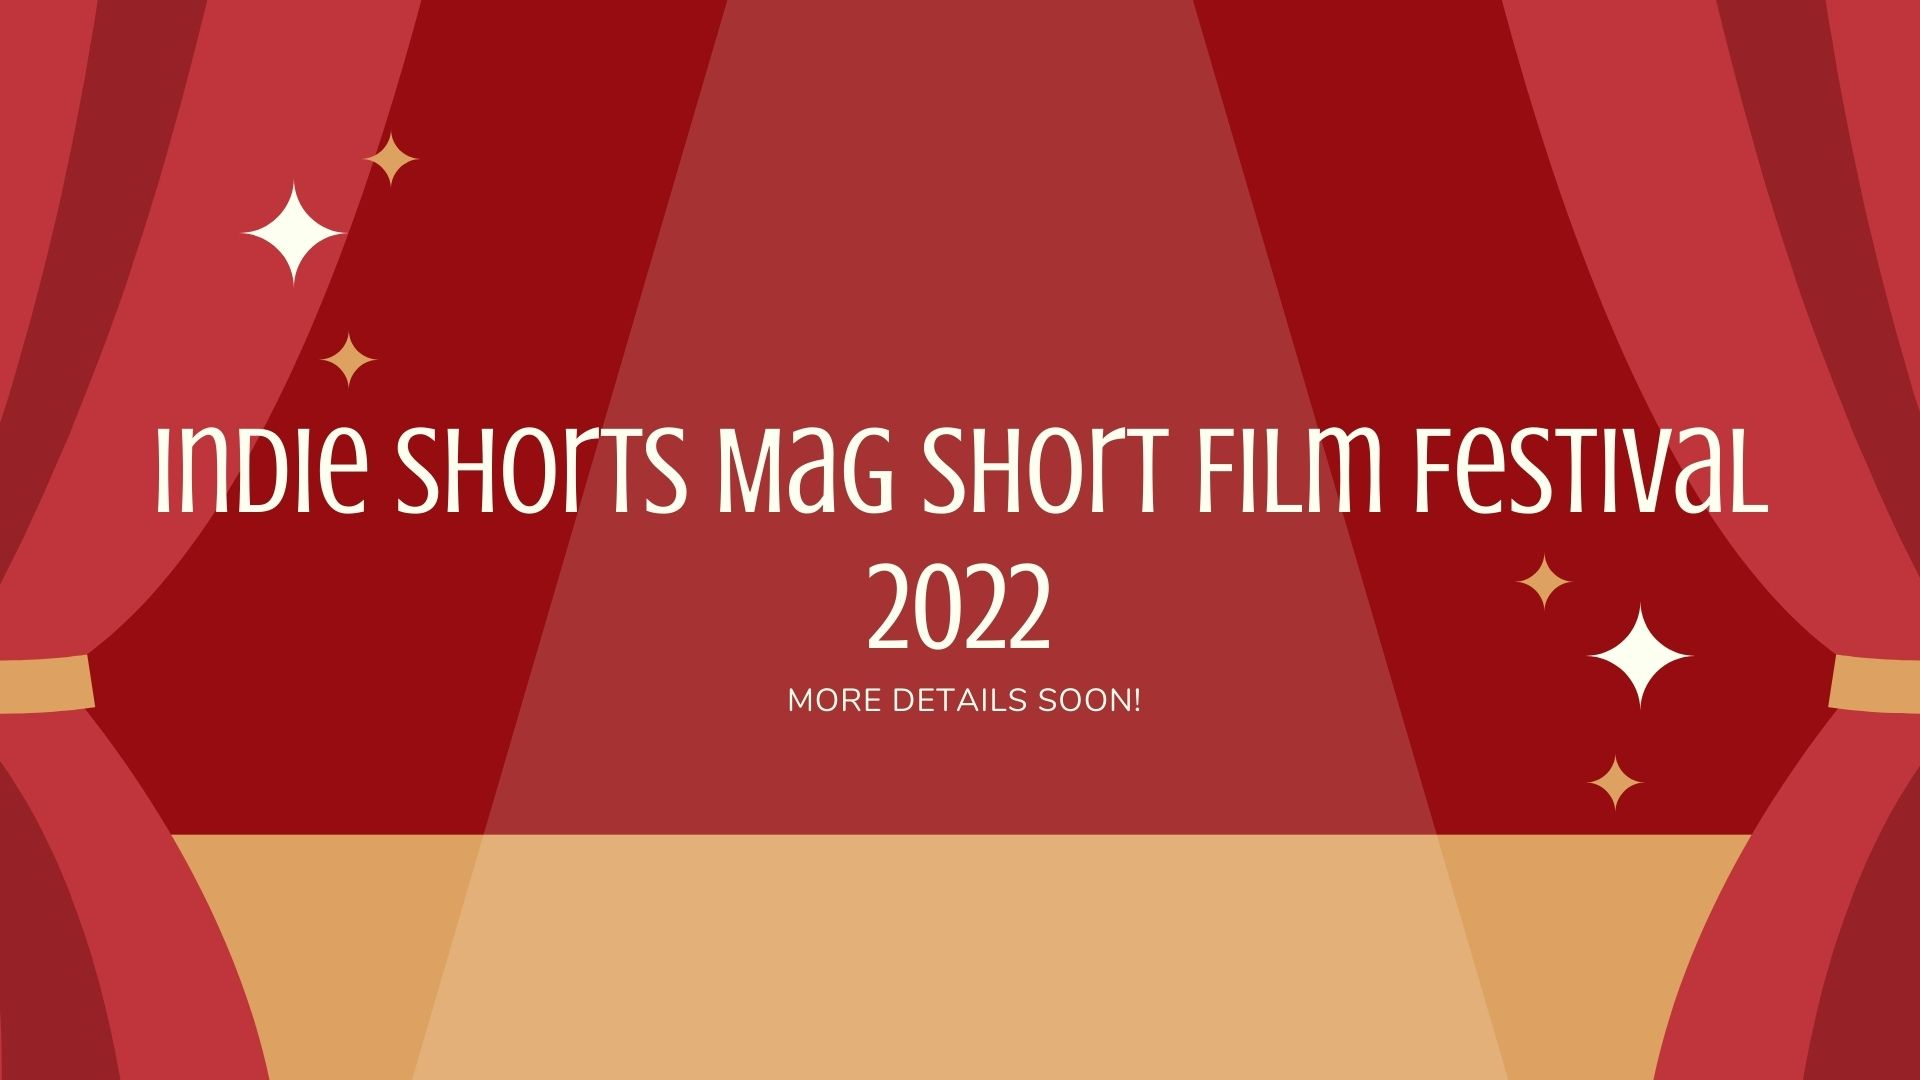 Photo for Indie Shorts Mag Short Film Festival 2022 on ViewStub